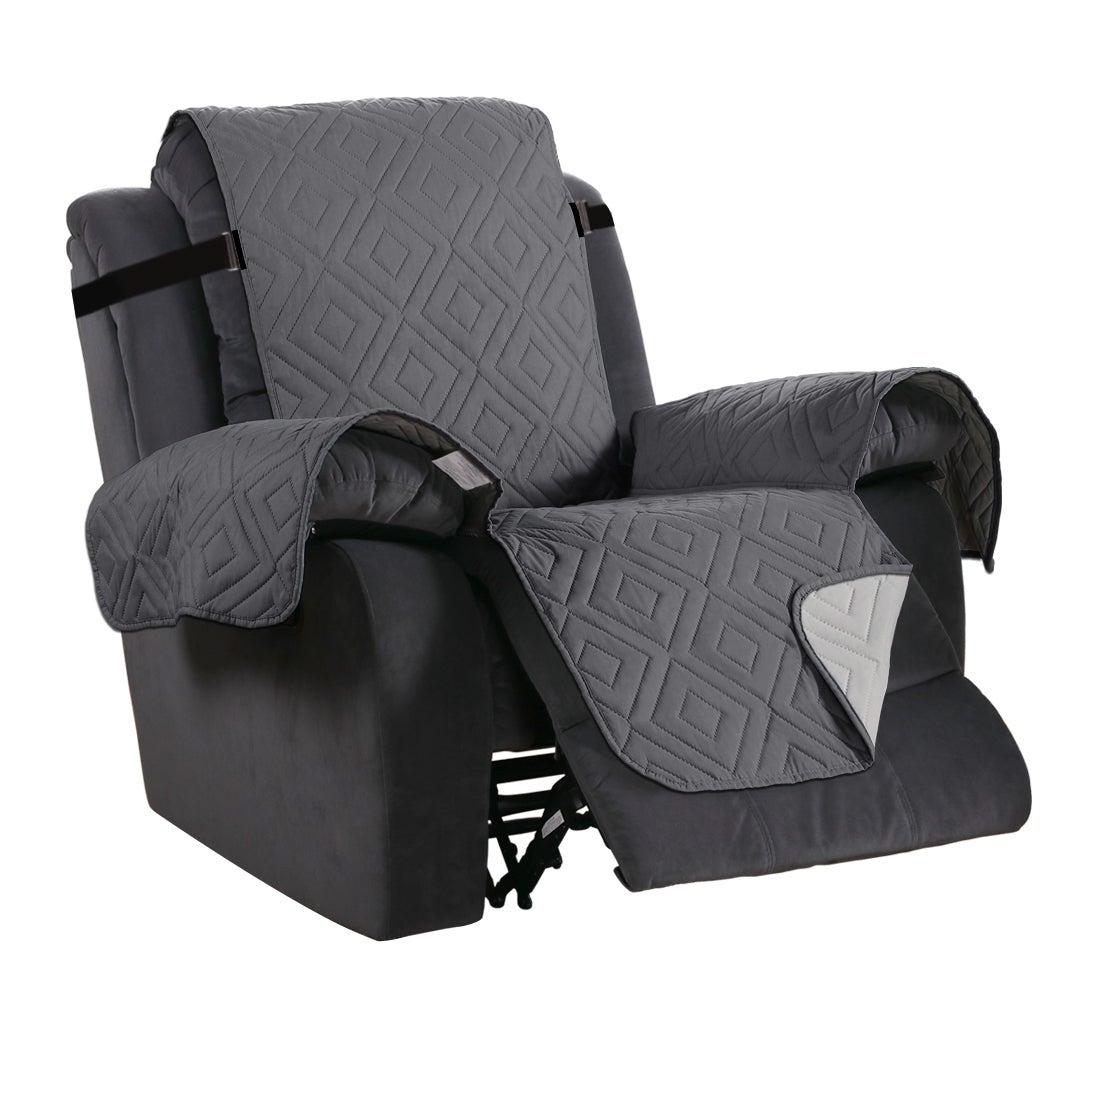 Recliner Cover Chair Reclining Chair Cover Protect from Pets/Kids Non Slip Cover